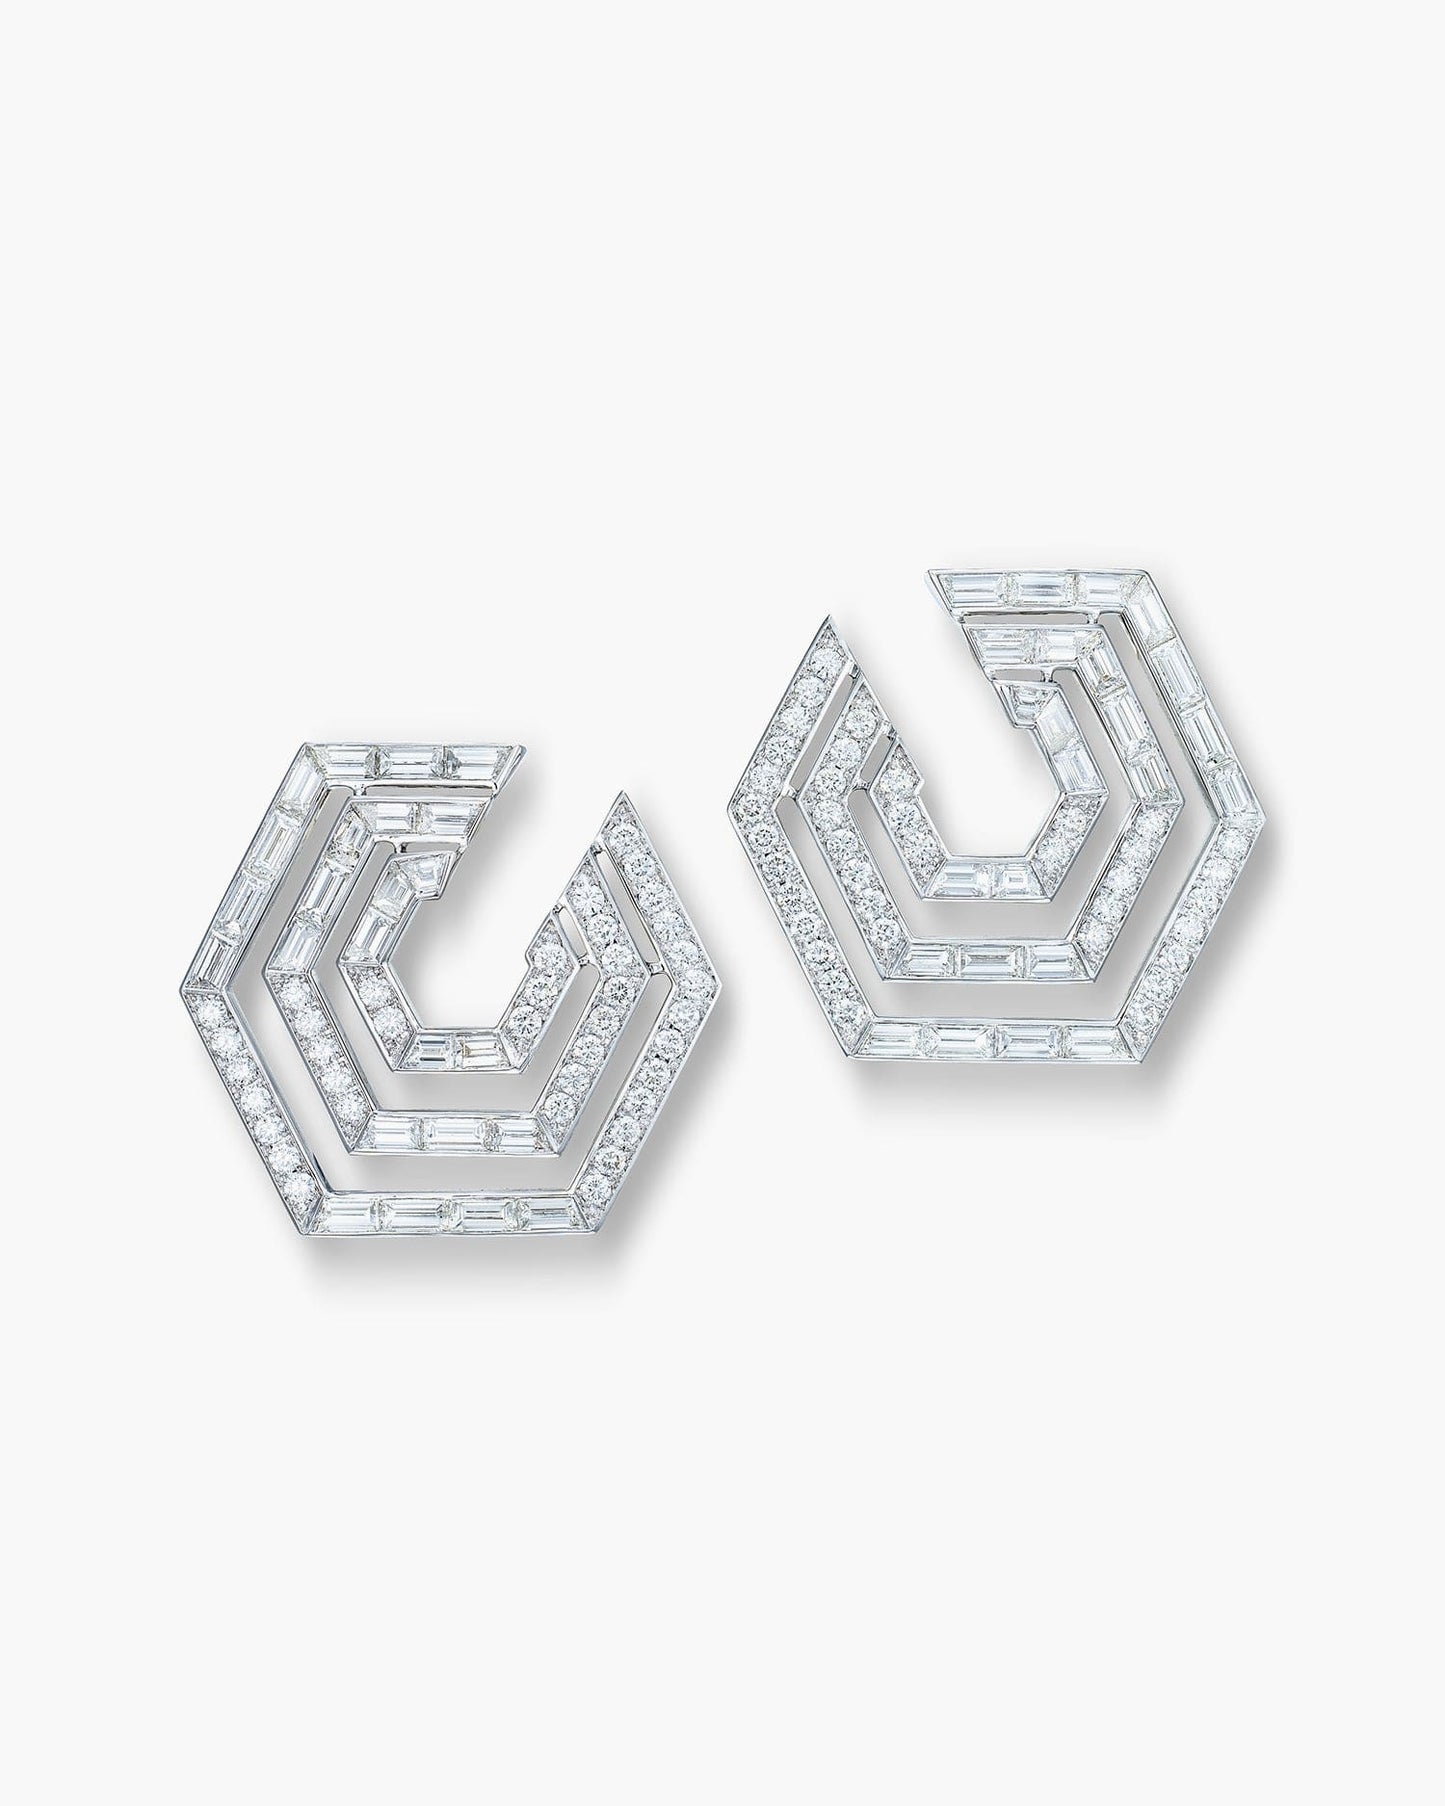 Diamond Concentrica Earrings in White Gold